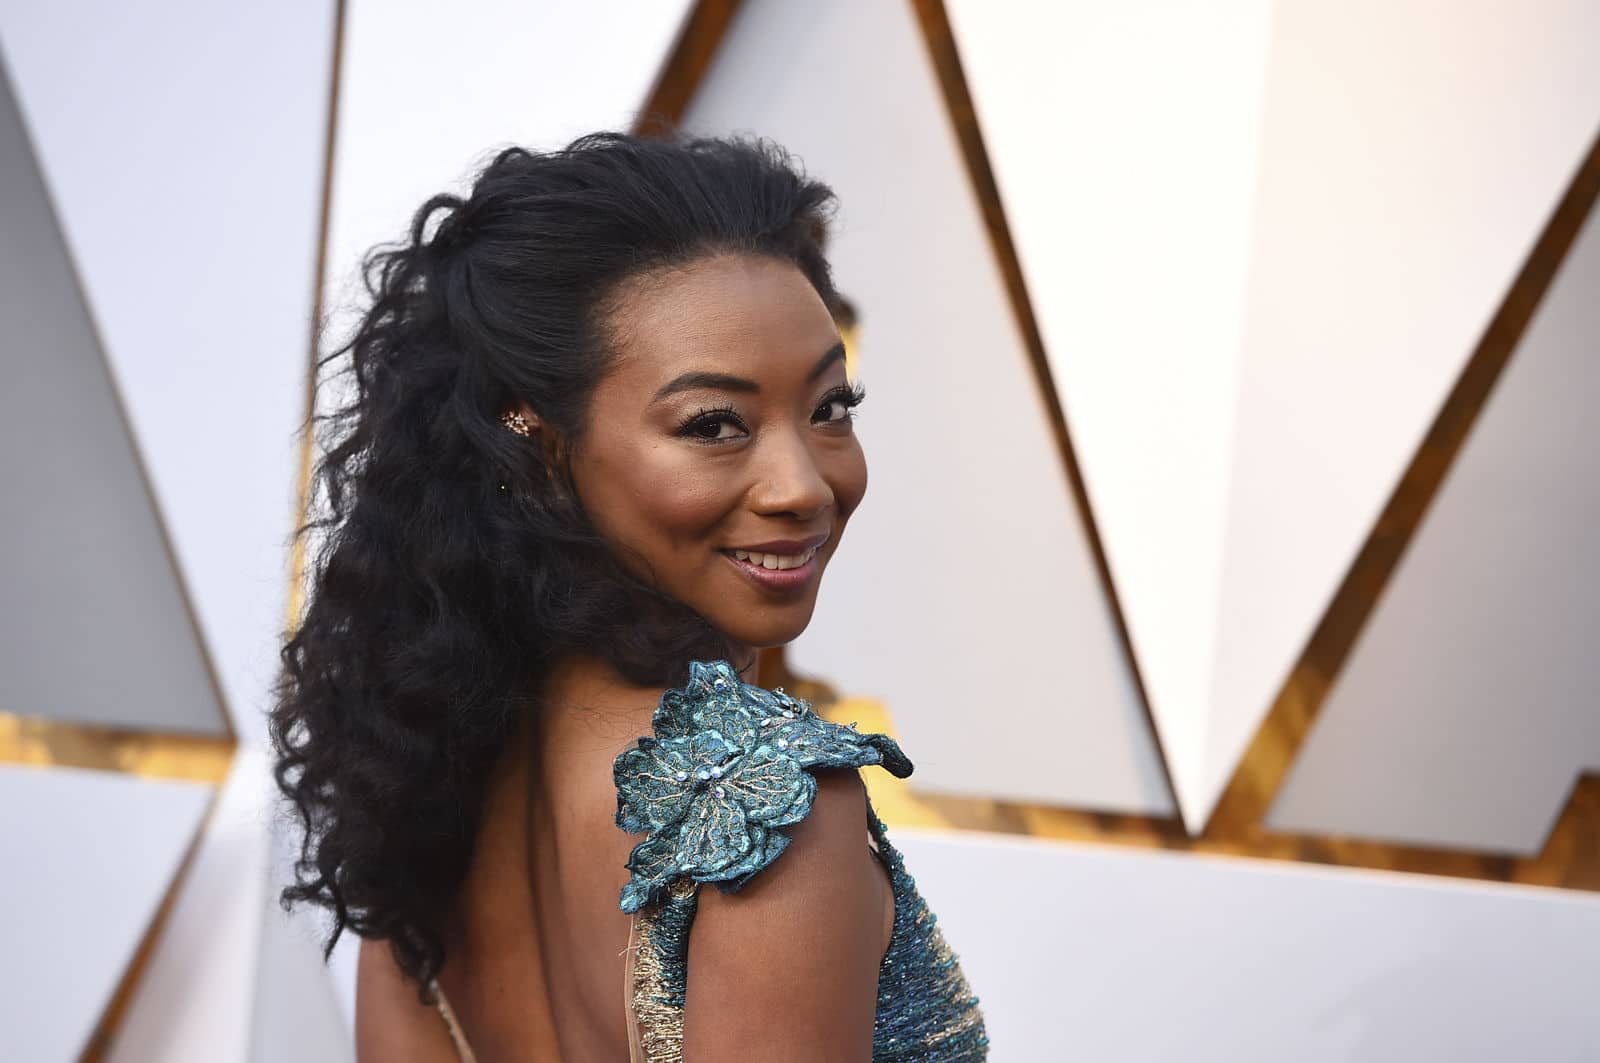 Betty Gabriel arrives at the Oscars on Sunday, March 4, 2018, at the Dolby Theatre in Los Angeles. (Photo by Jordan Strauss/Invision/AP)